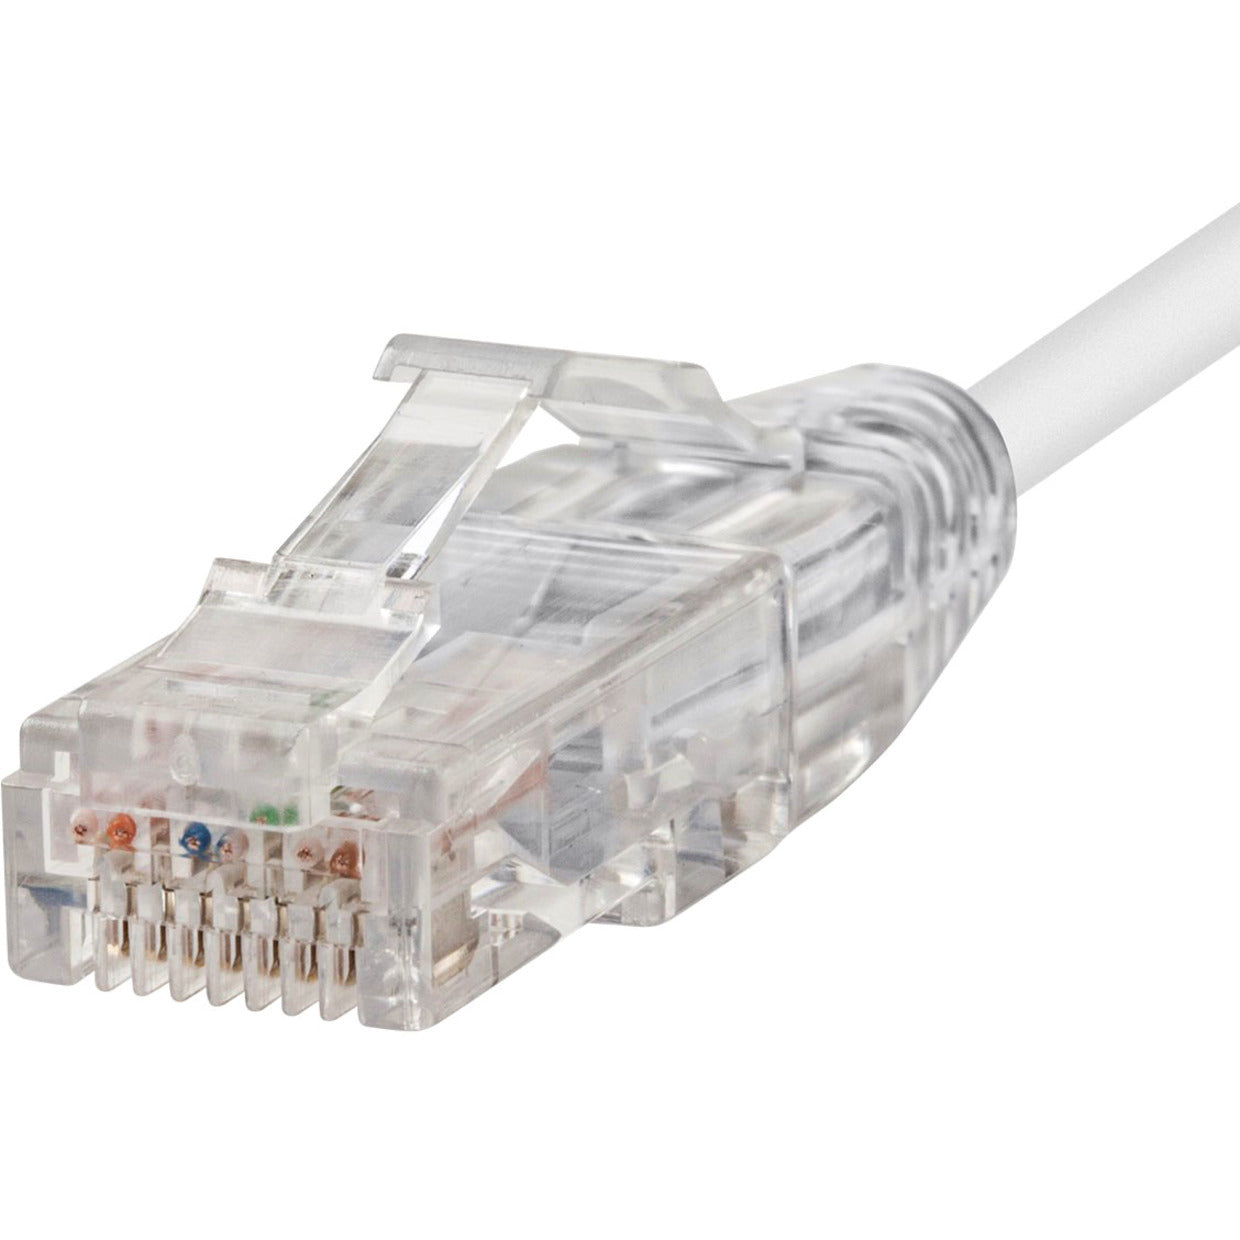 Monoprice 13511 SlimRun Cat6 6-inch White Ethernet Network Cable, Flexible and Snagless